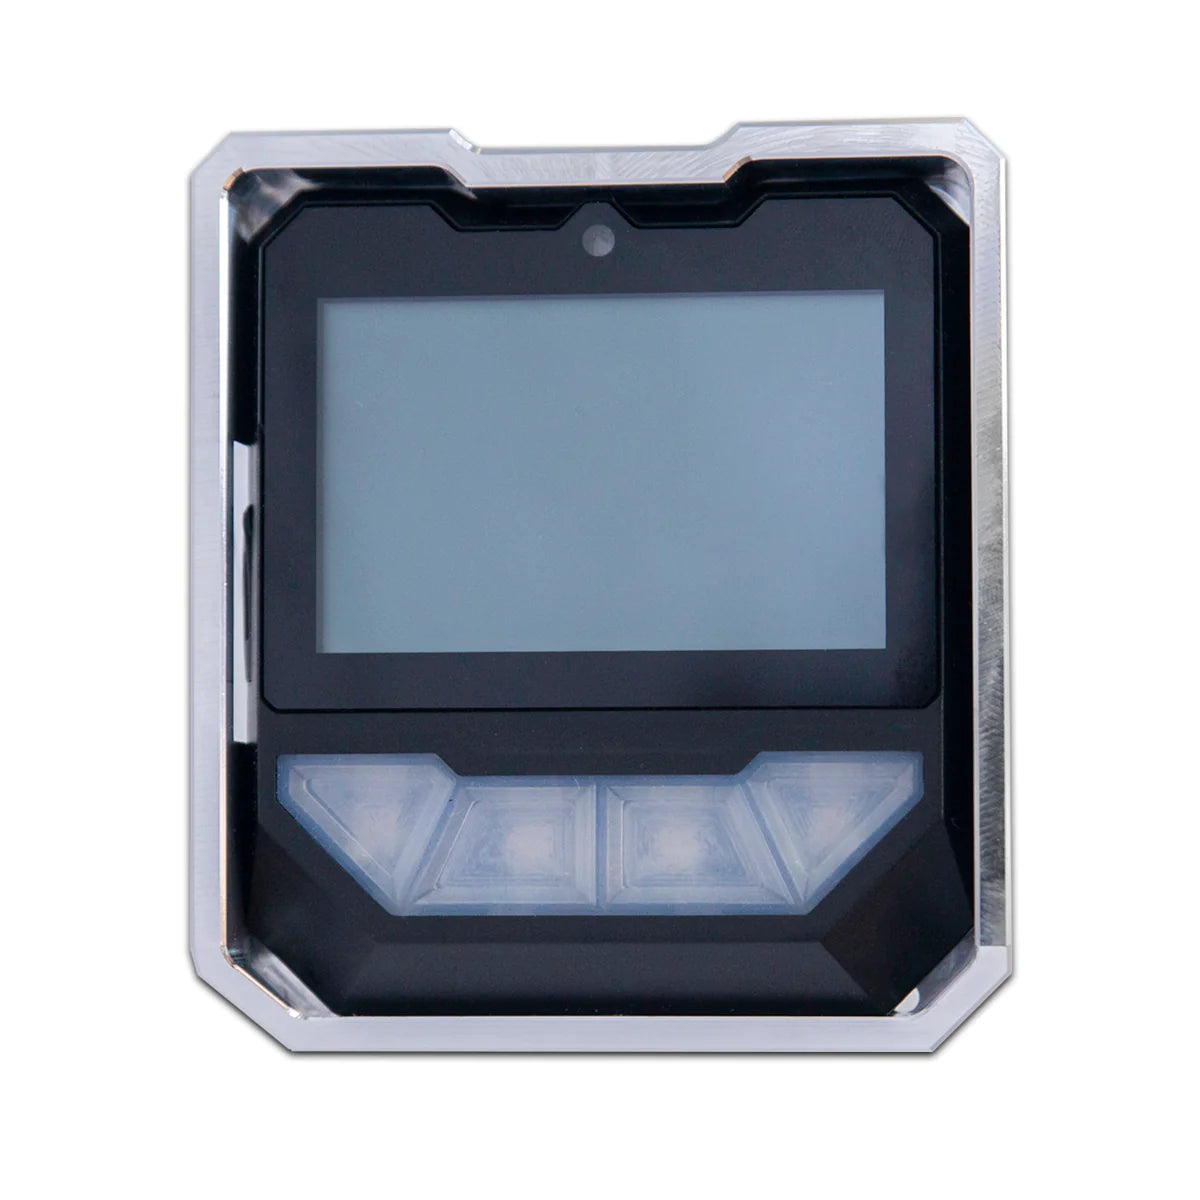 SurRonshop Nucular Display Protective Case with Clamps - Billet Aluminum